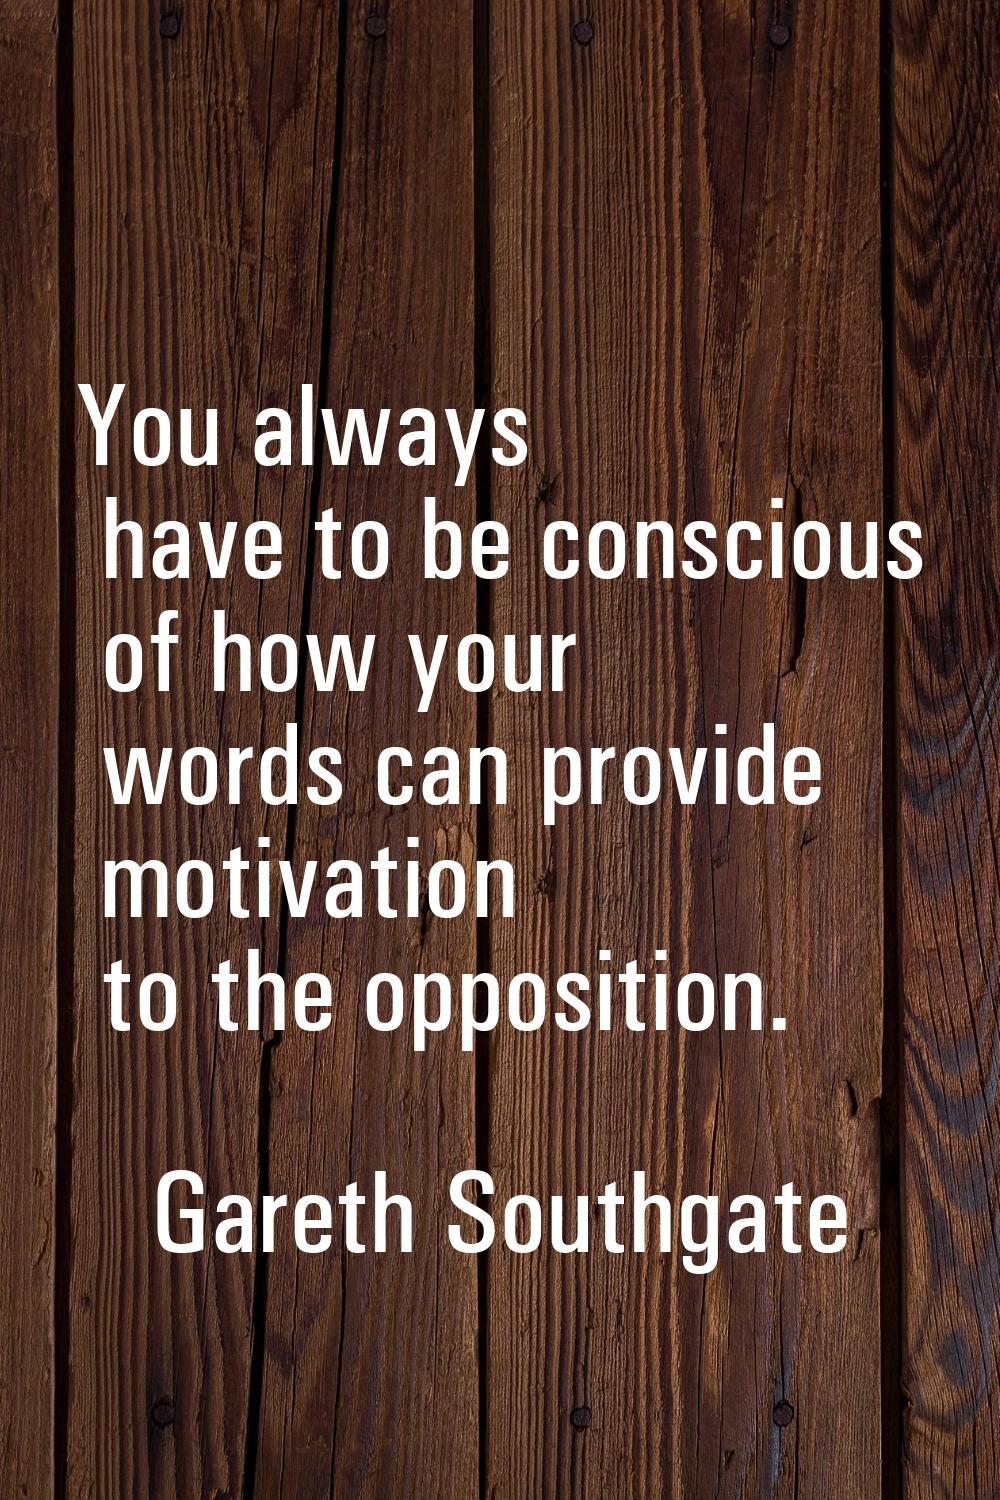 You always have to be conscious of how your words can provide motivation to the opposition.